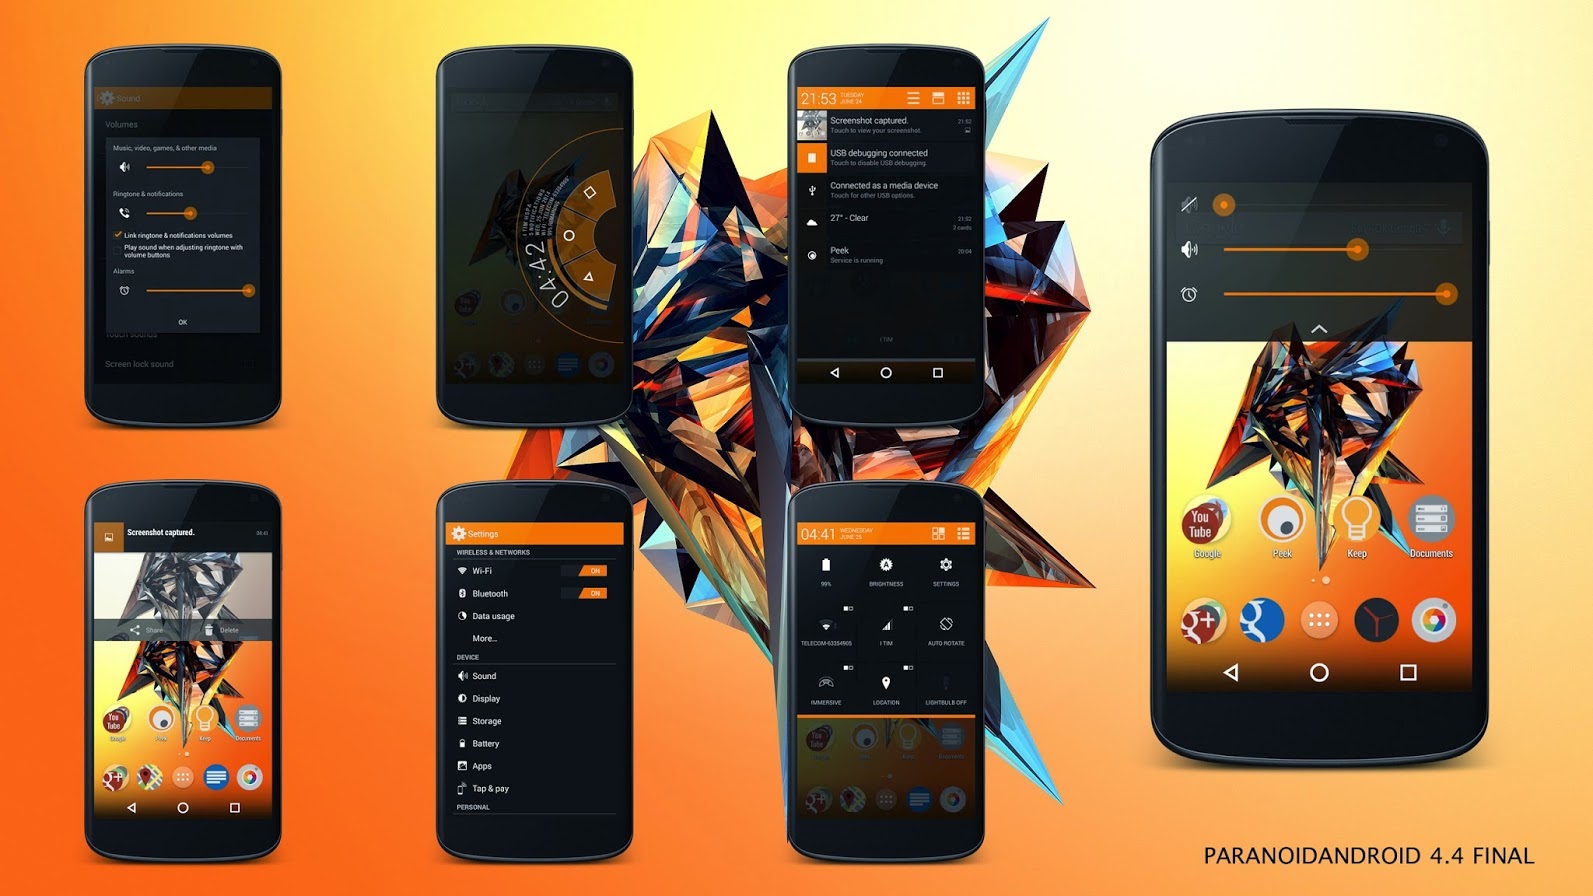 Paranoid Android 4.4 Final release